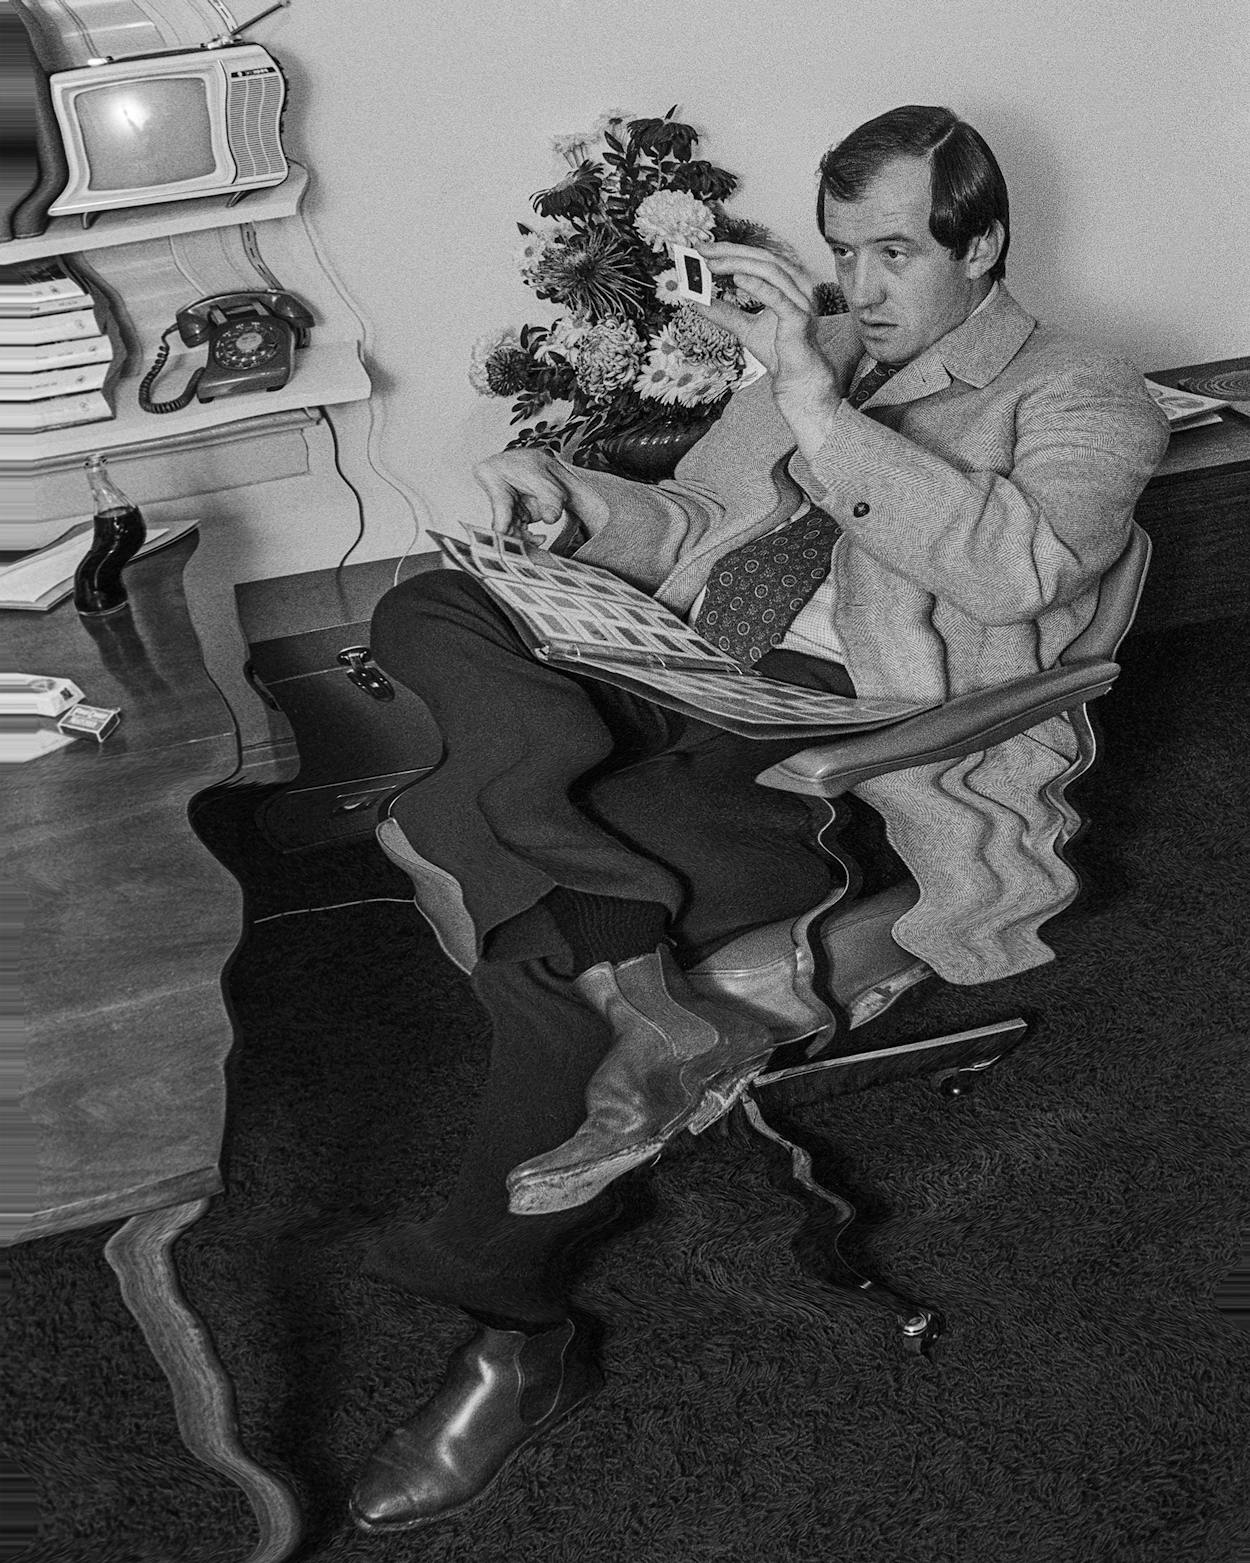 Hickey in his office on November 13, 1969.